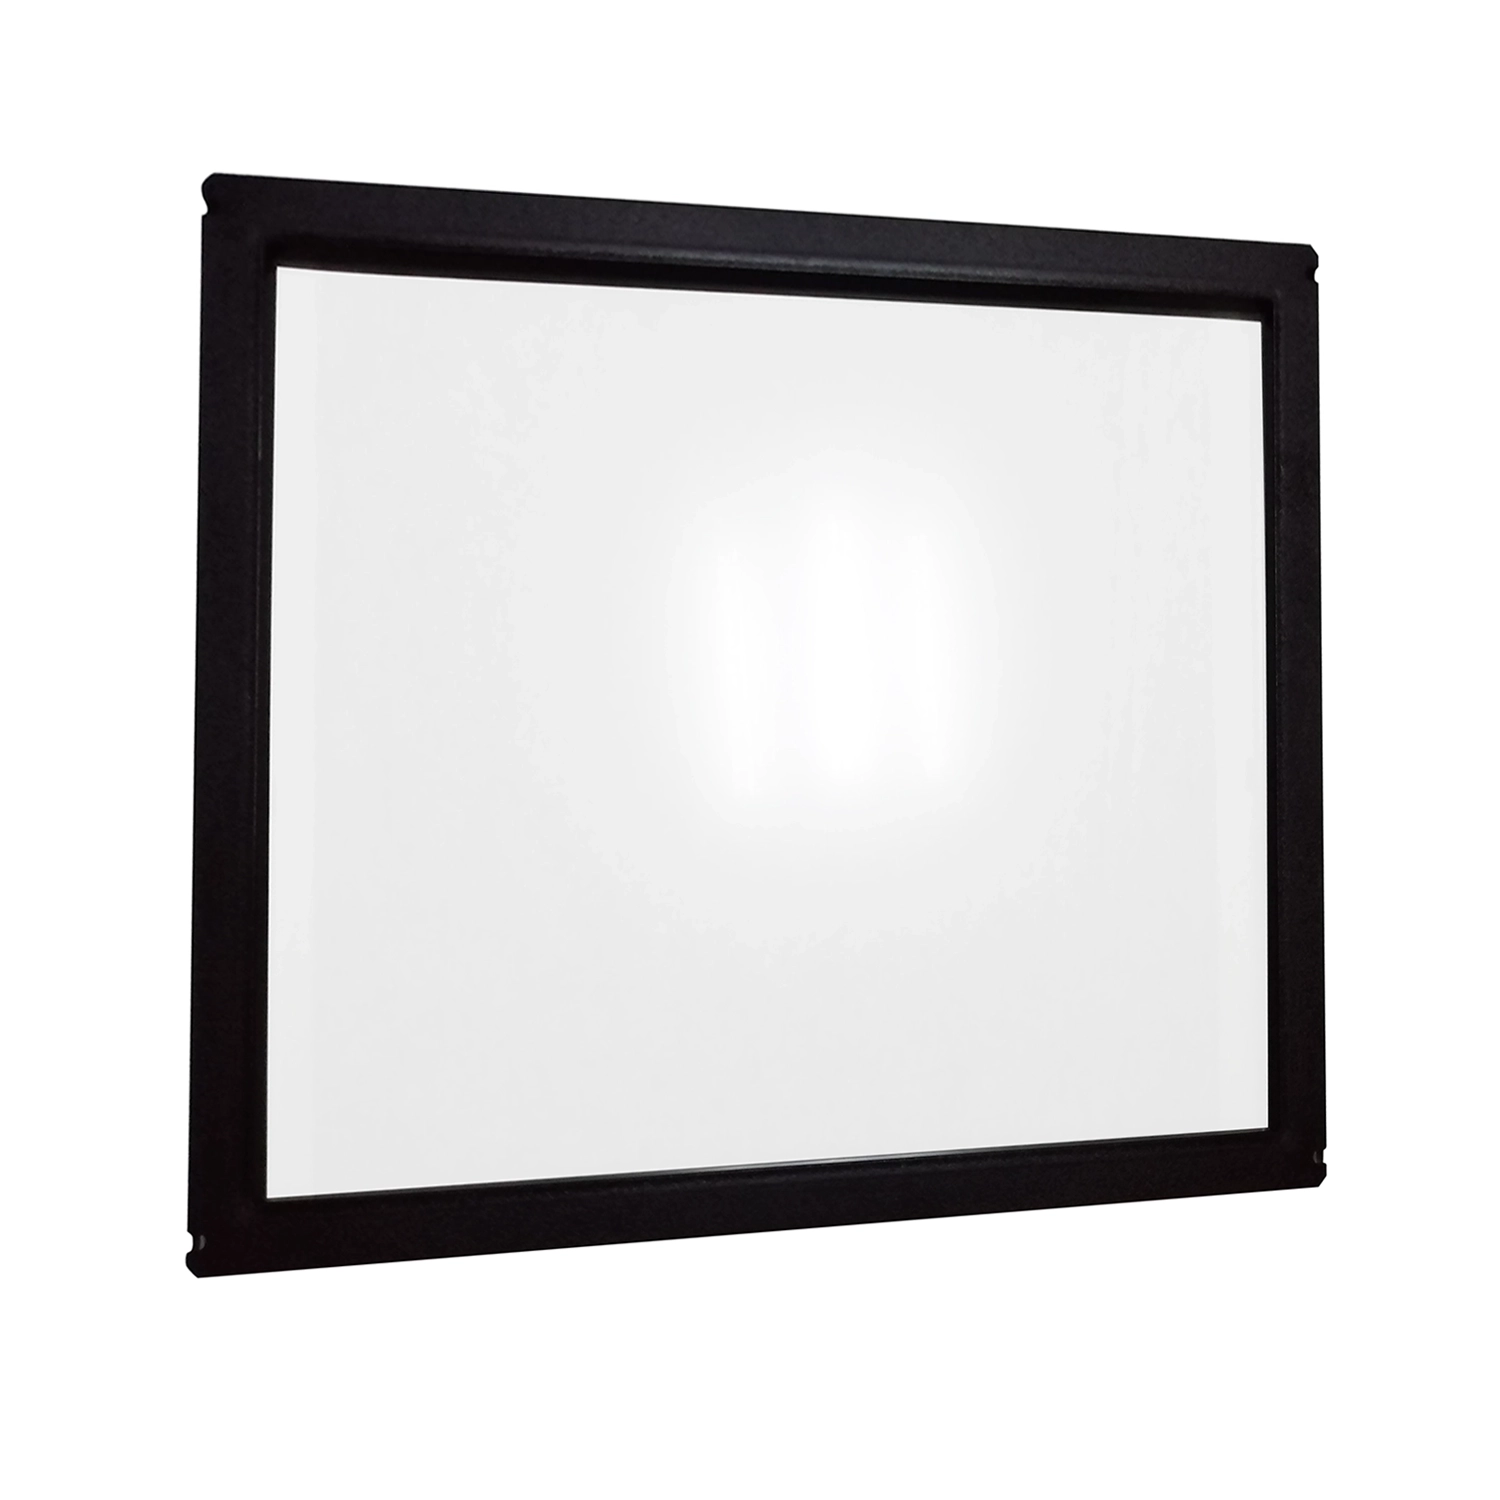 TOUCH FRAME WITH GLASS KEETOUCH 17" KP-170-IW2S0U2